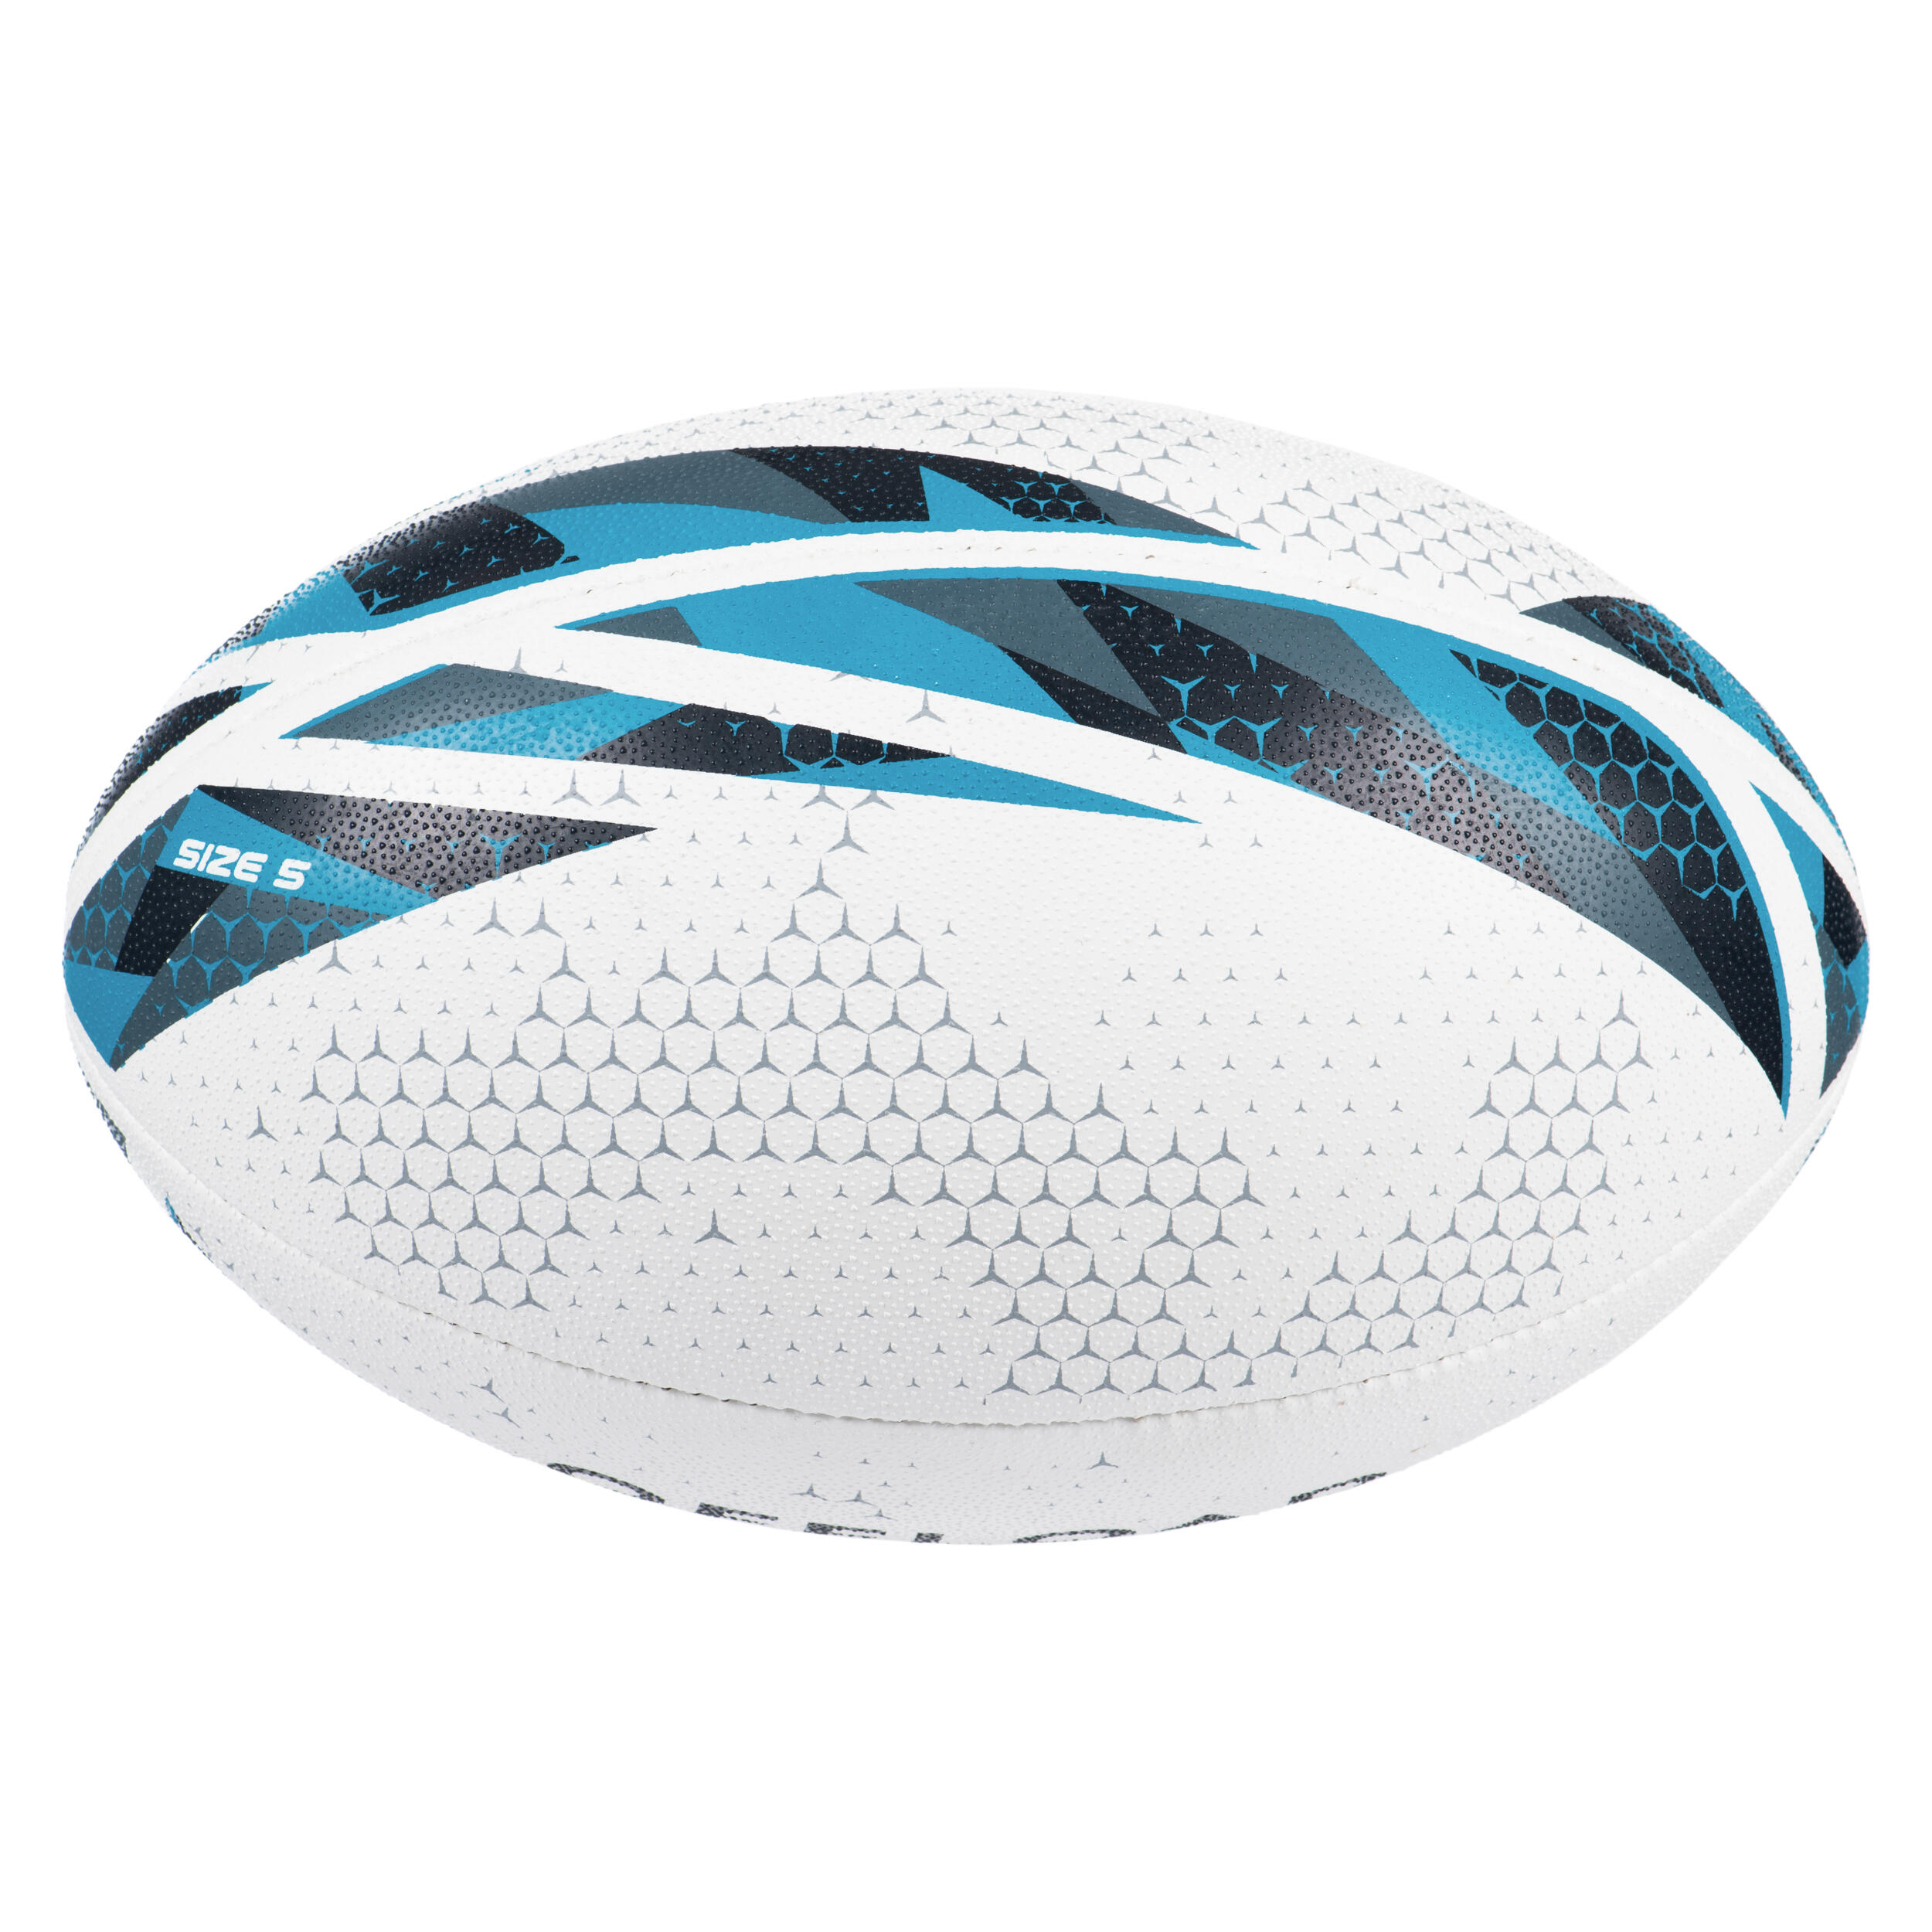 Size 5 Rugby Ball R500 Match - White 6/8